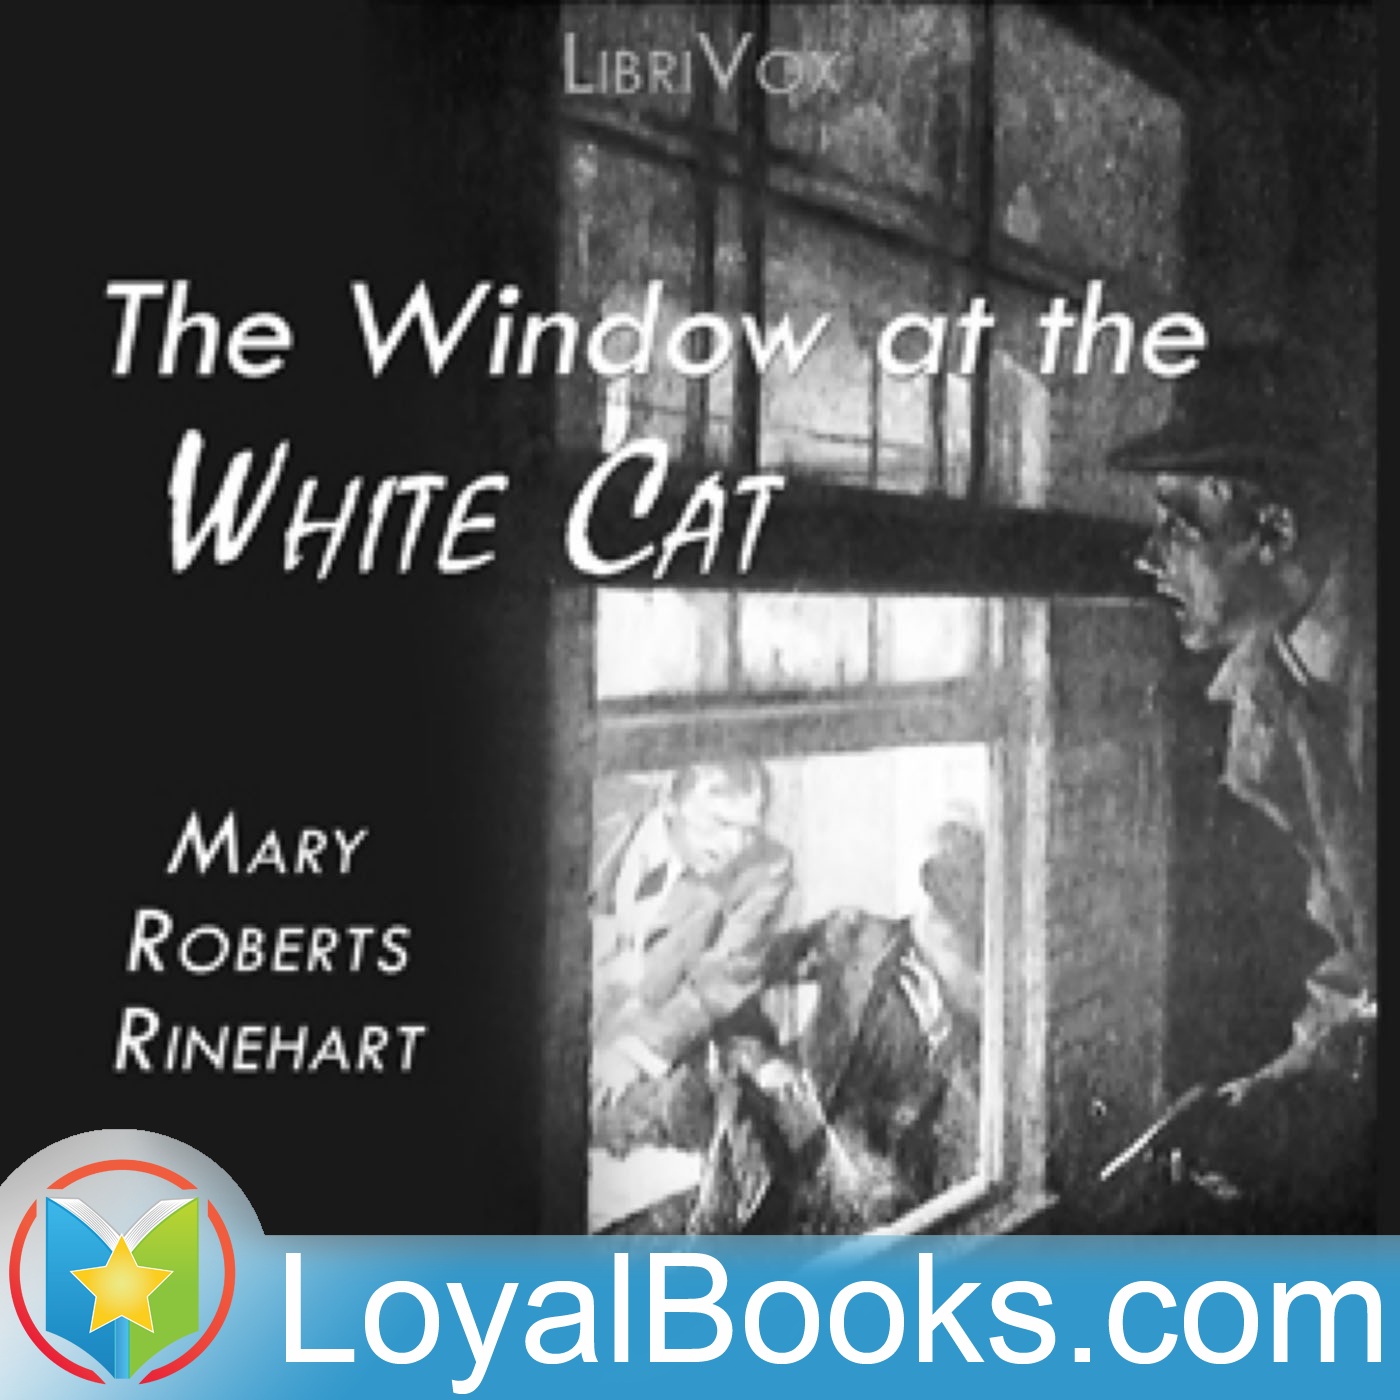 The Window at the White Cat by Mary Roberts Rinehart